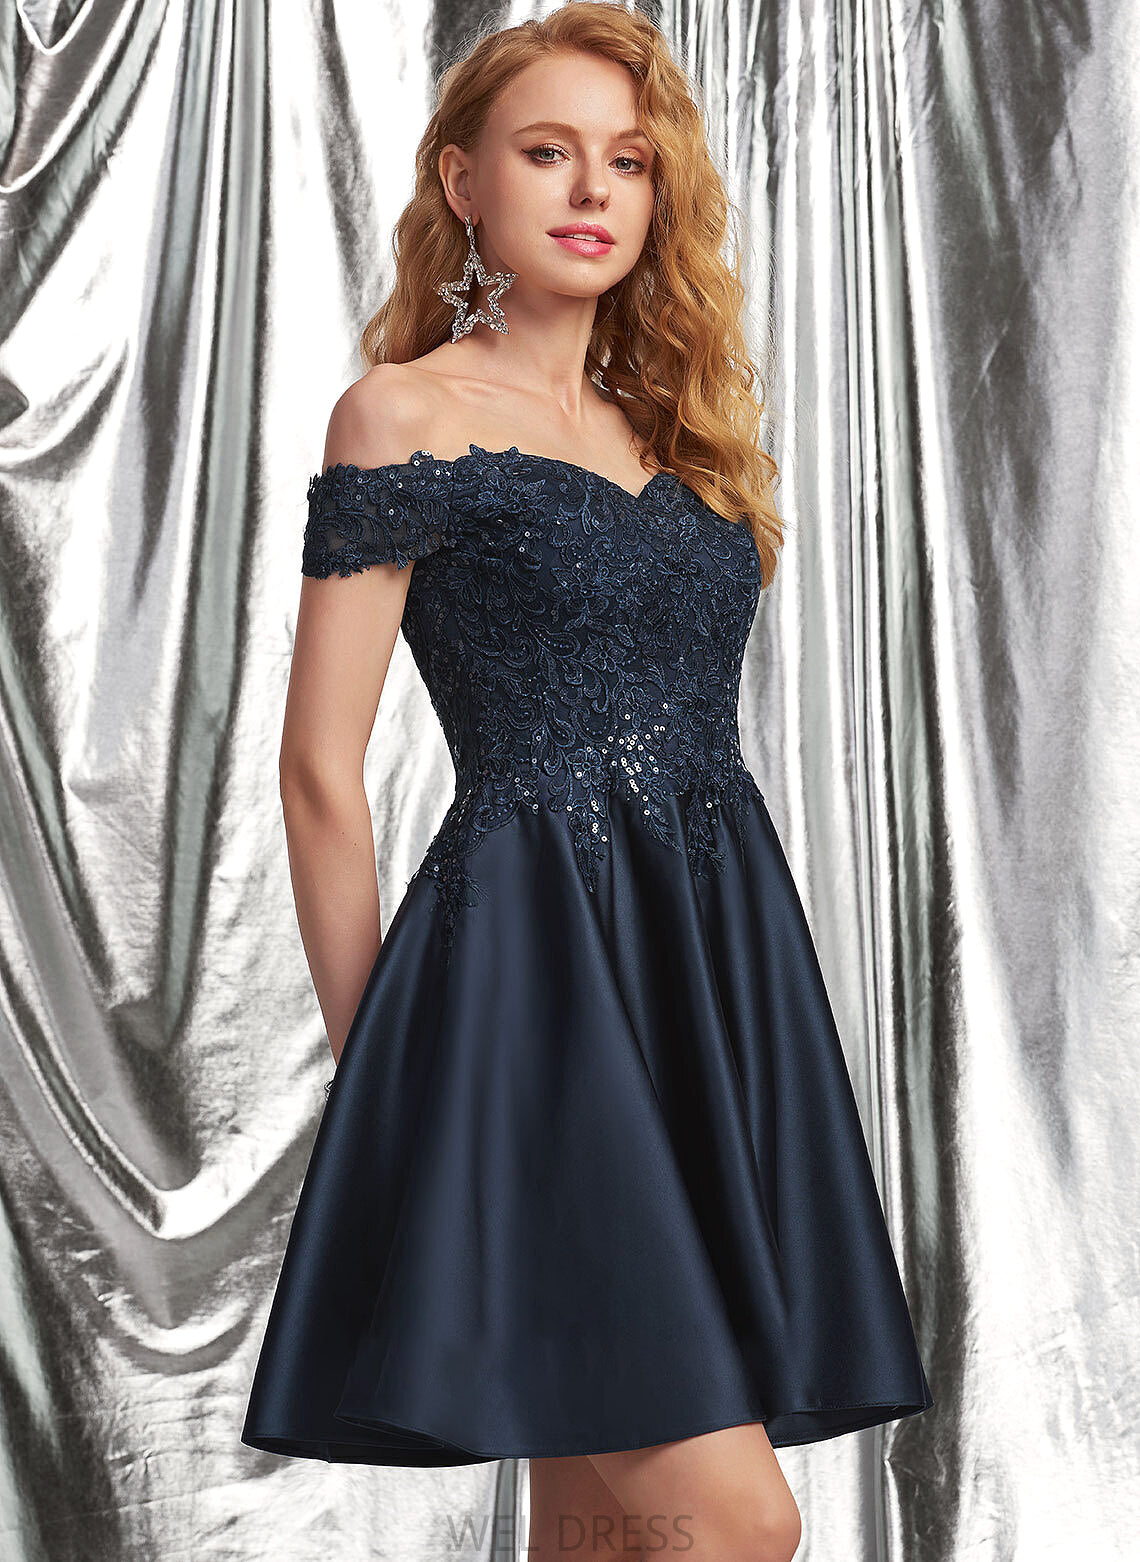 Lace Sequins Sarahi Prom Dresses With Off-the-Shoulder Short/Mini Satin A-Line